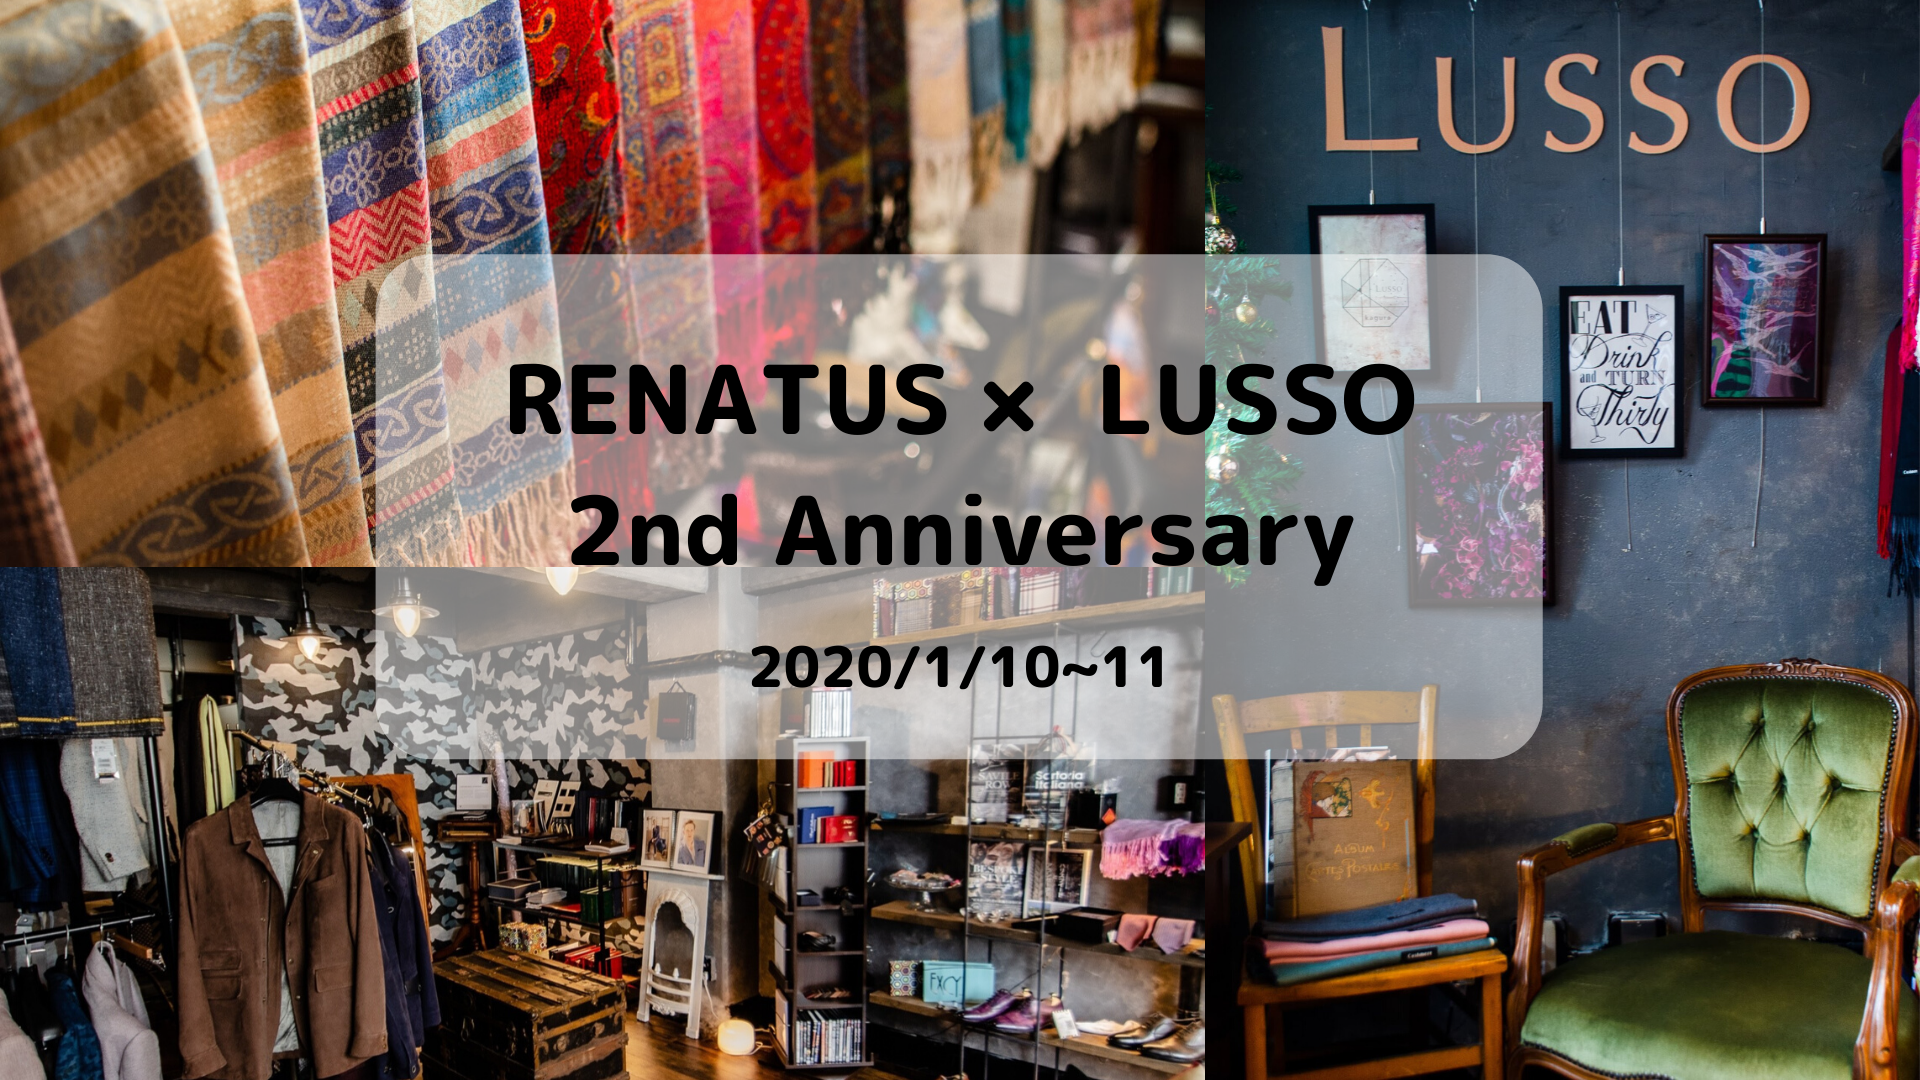 2020/1/10-11 RENTUS×LUSSO 2nd anniversary party